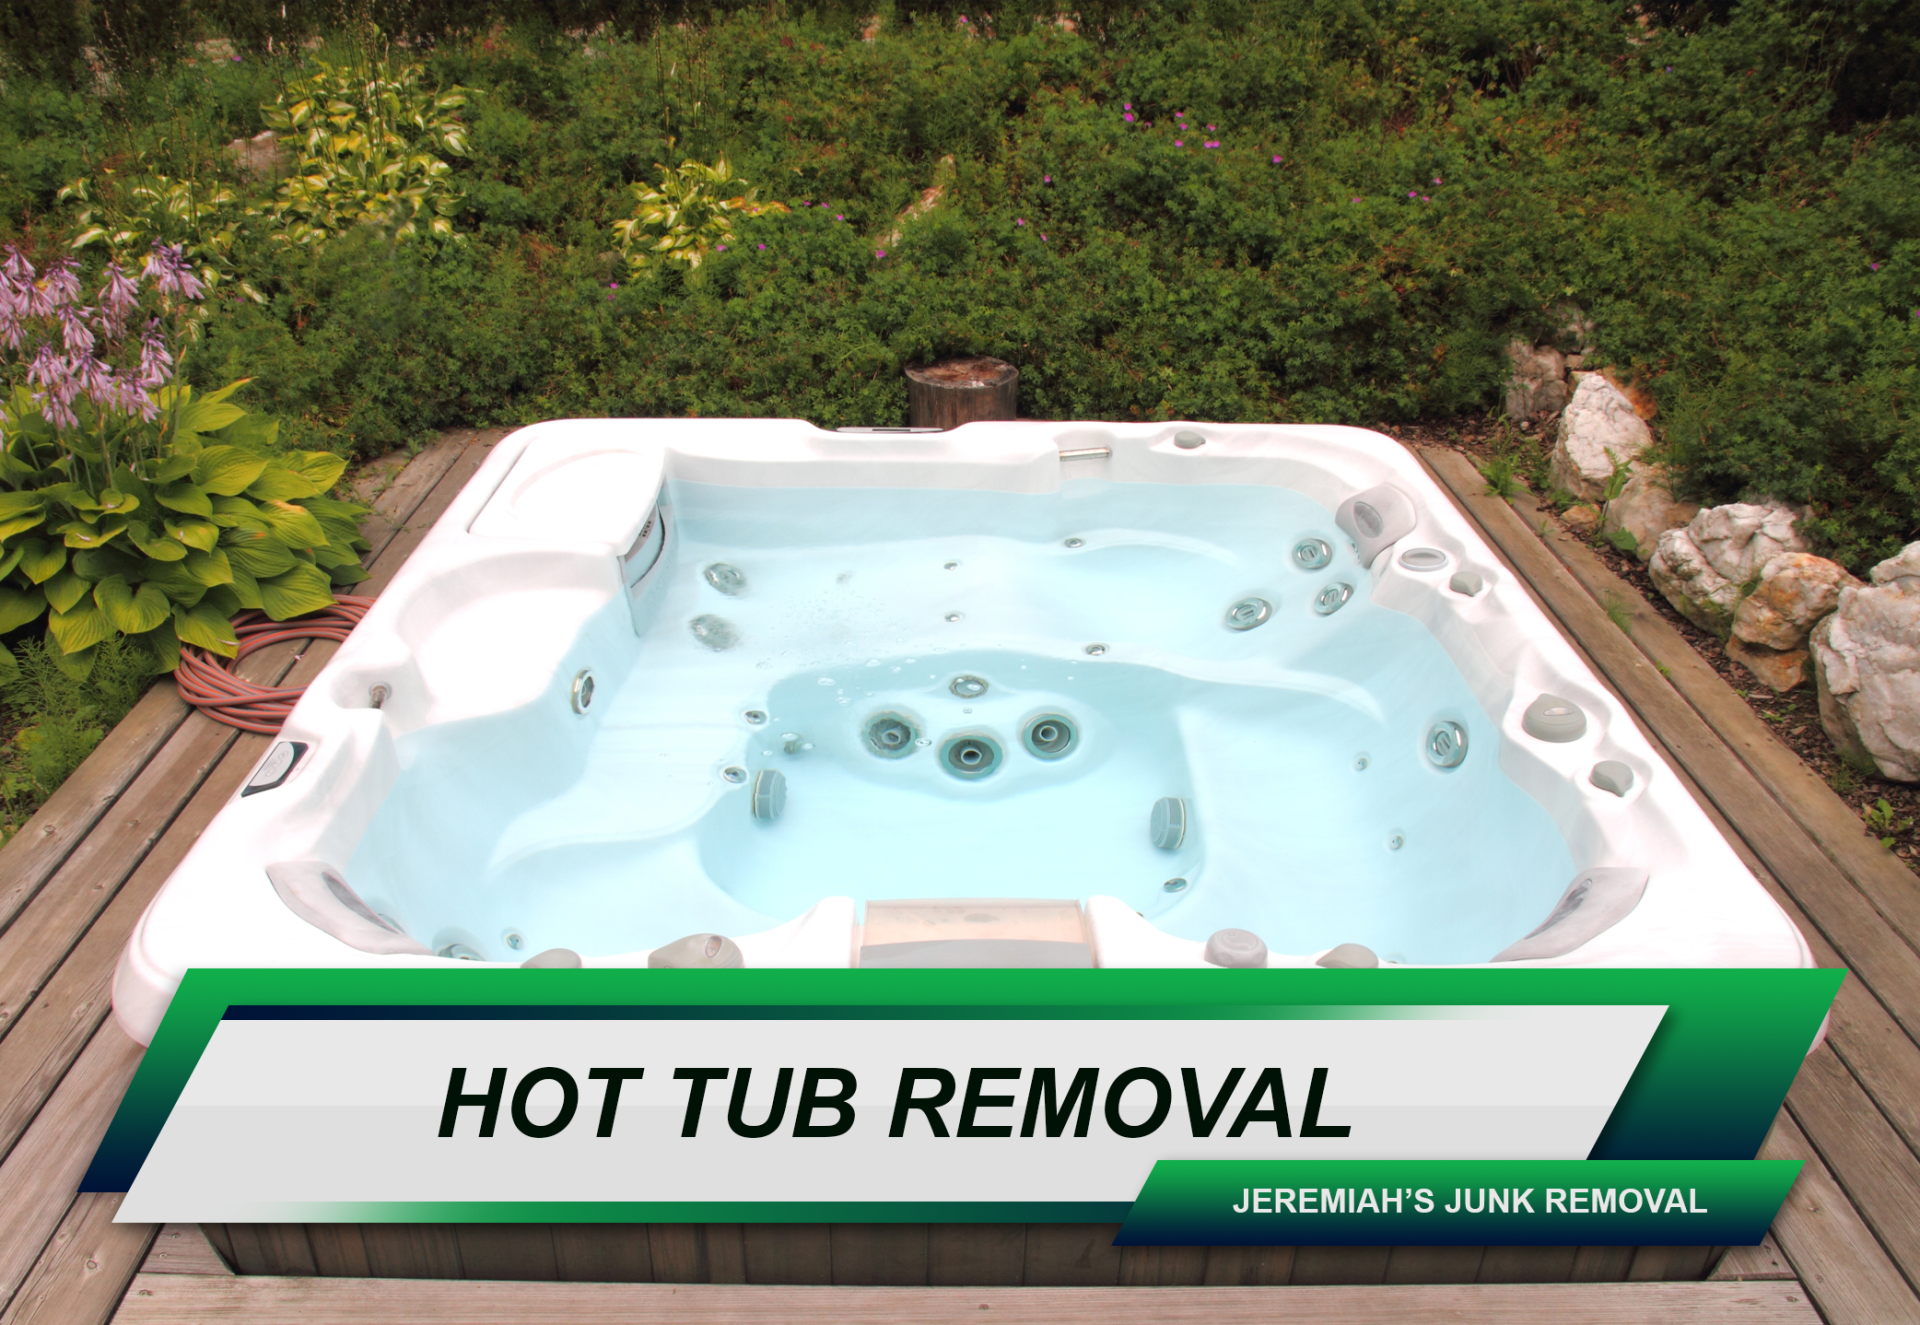 Hot Tub removal services